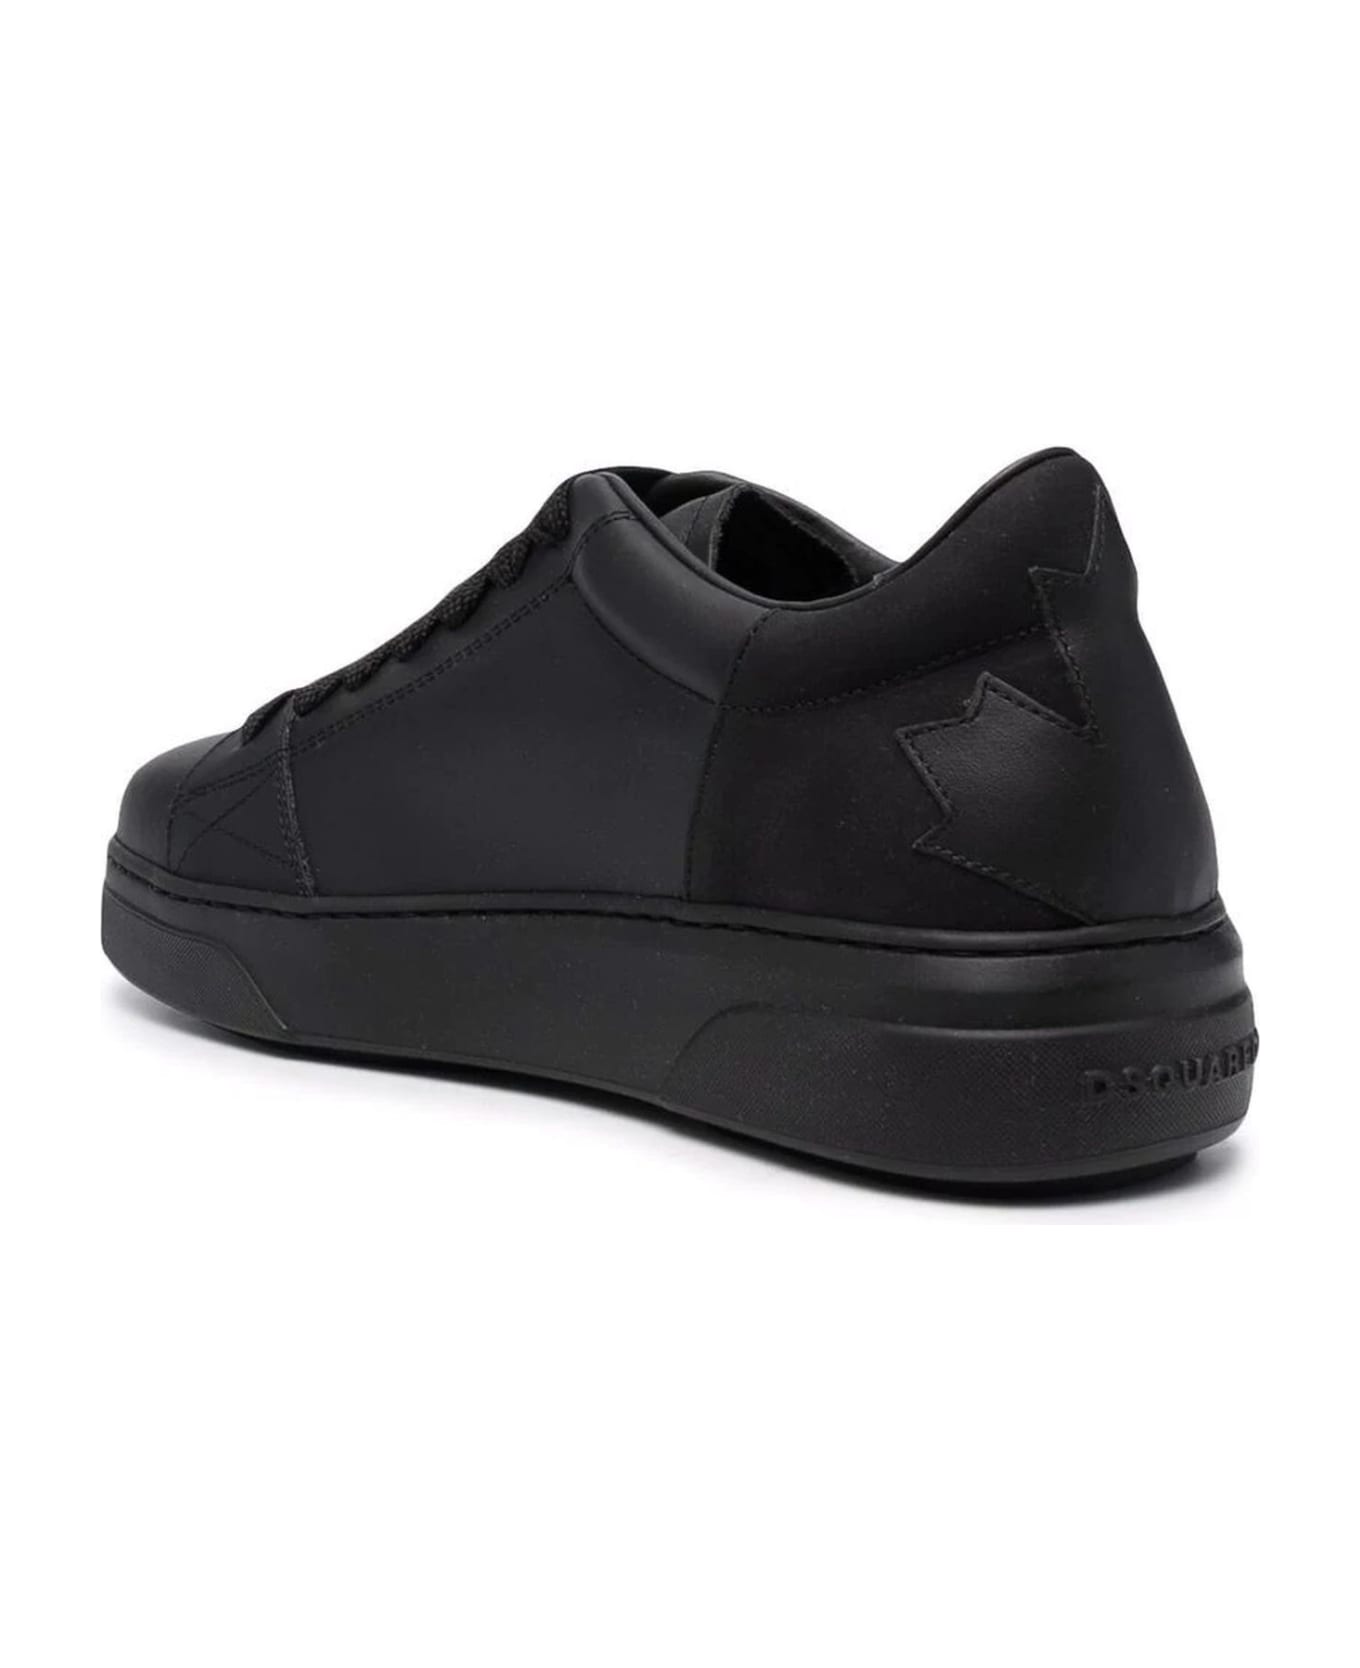 Dsquared2 Black Leather Sneakers - Black